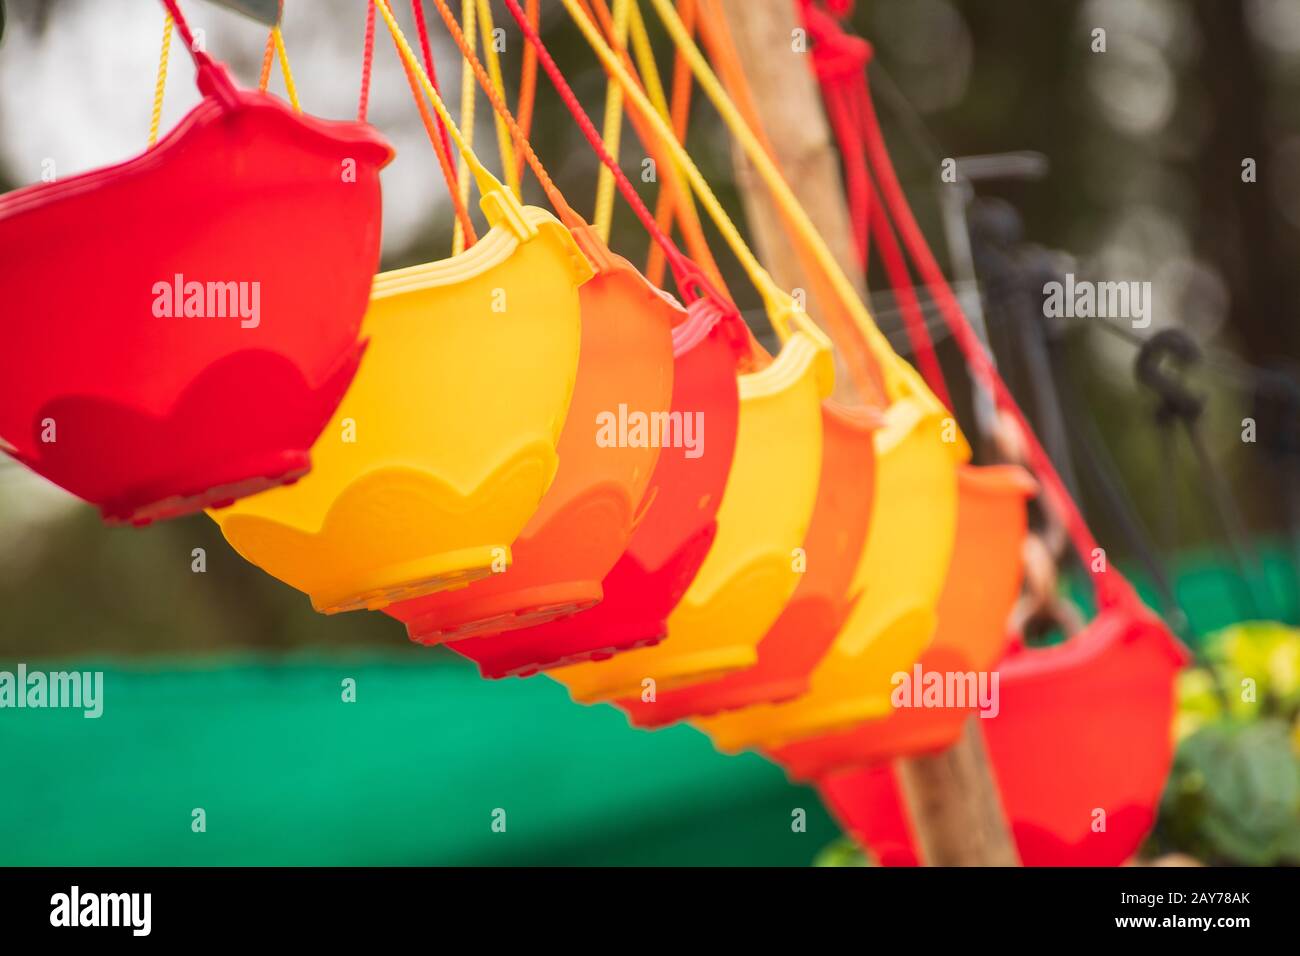 Colorful hanging flower pots Stock Photo